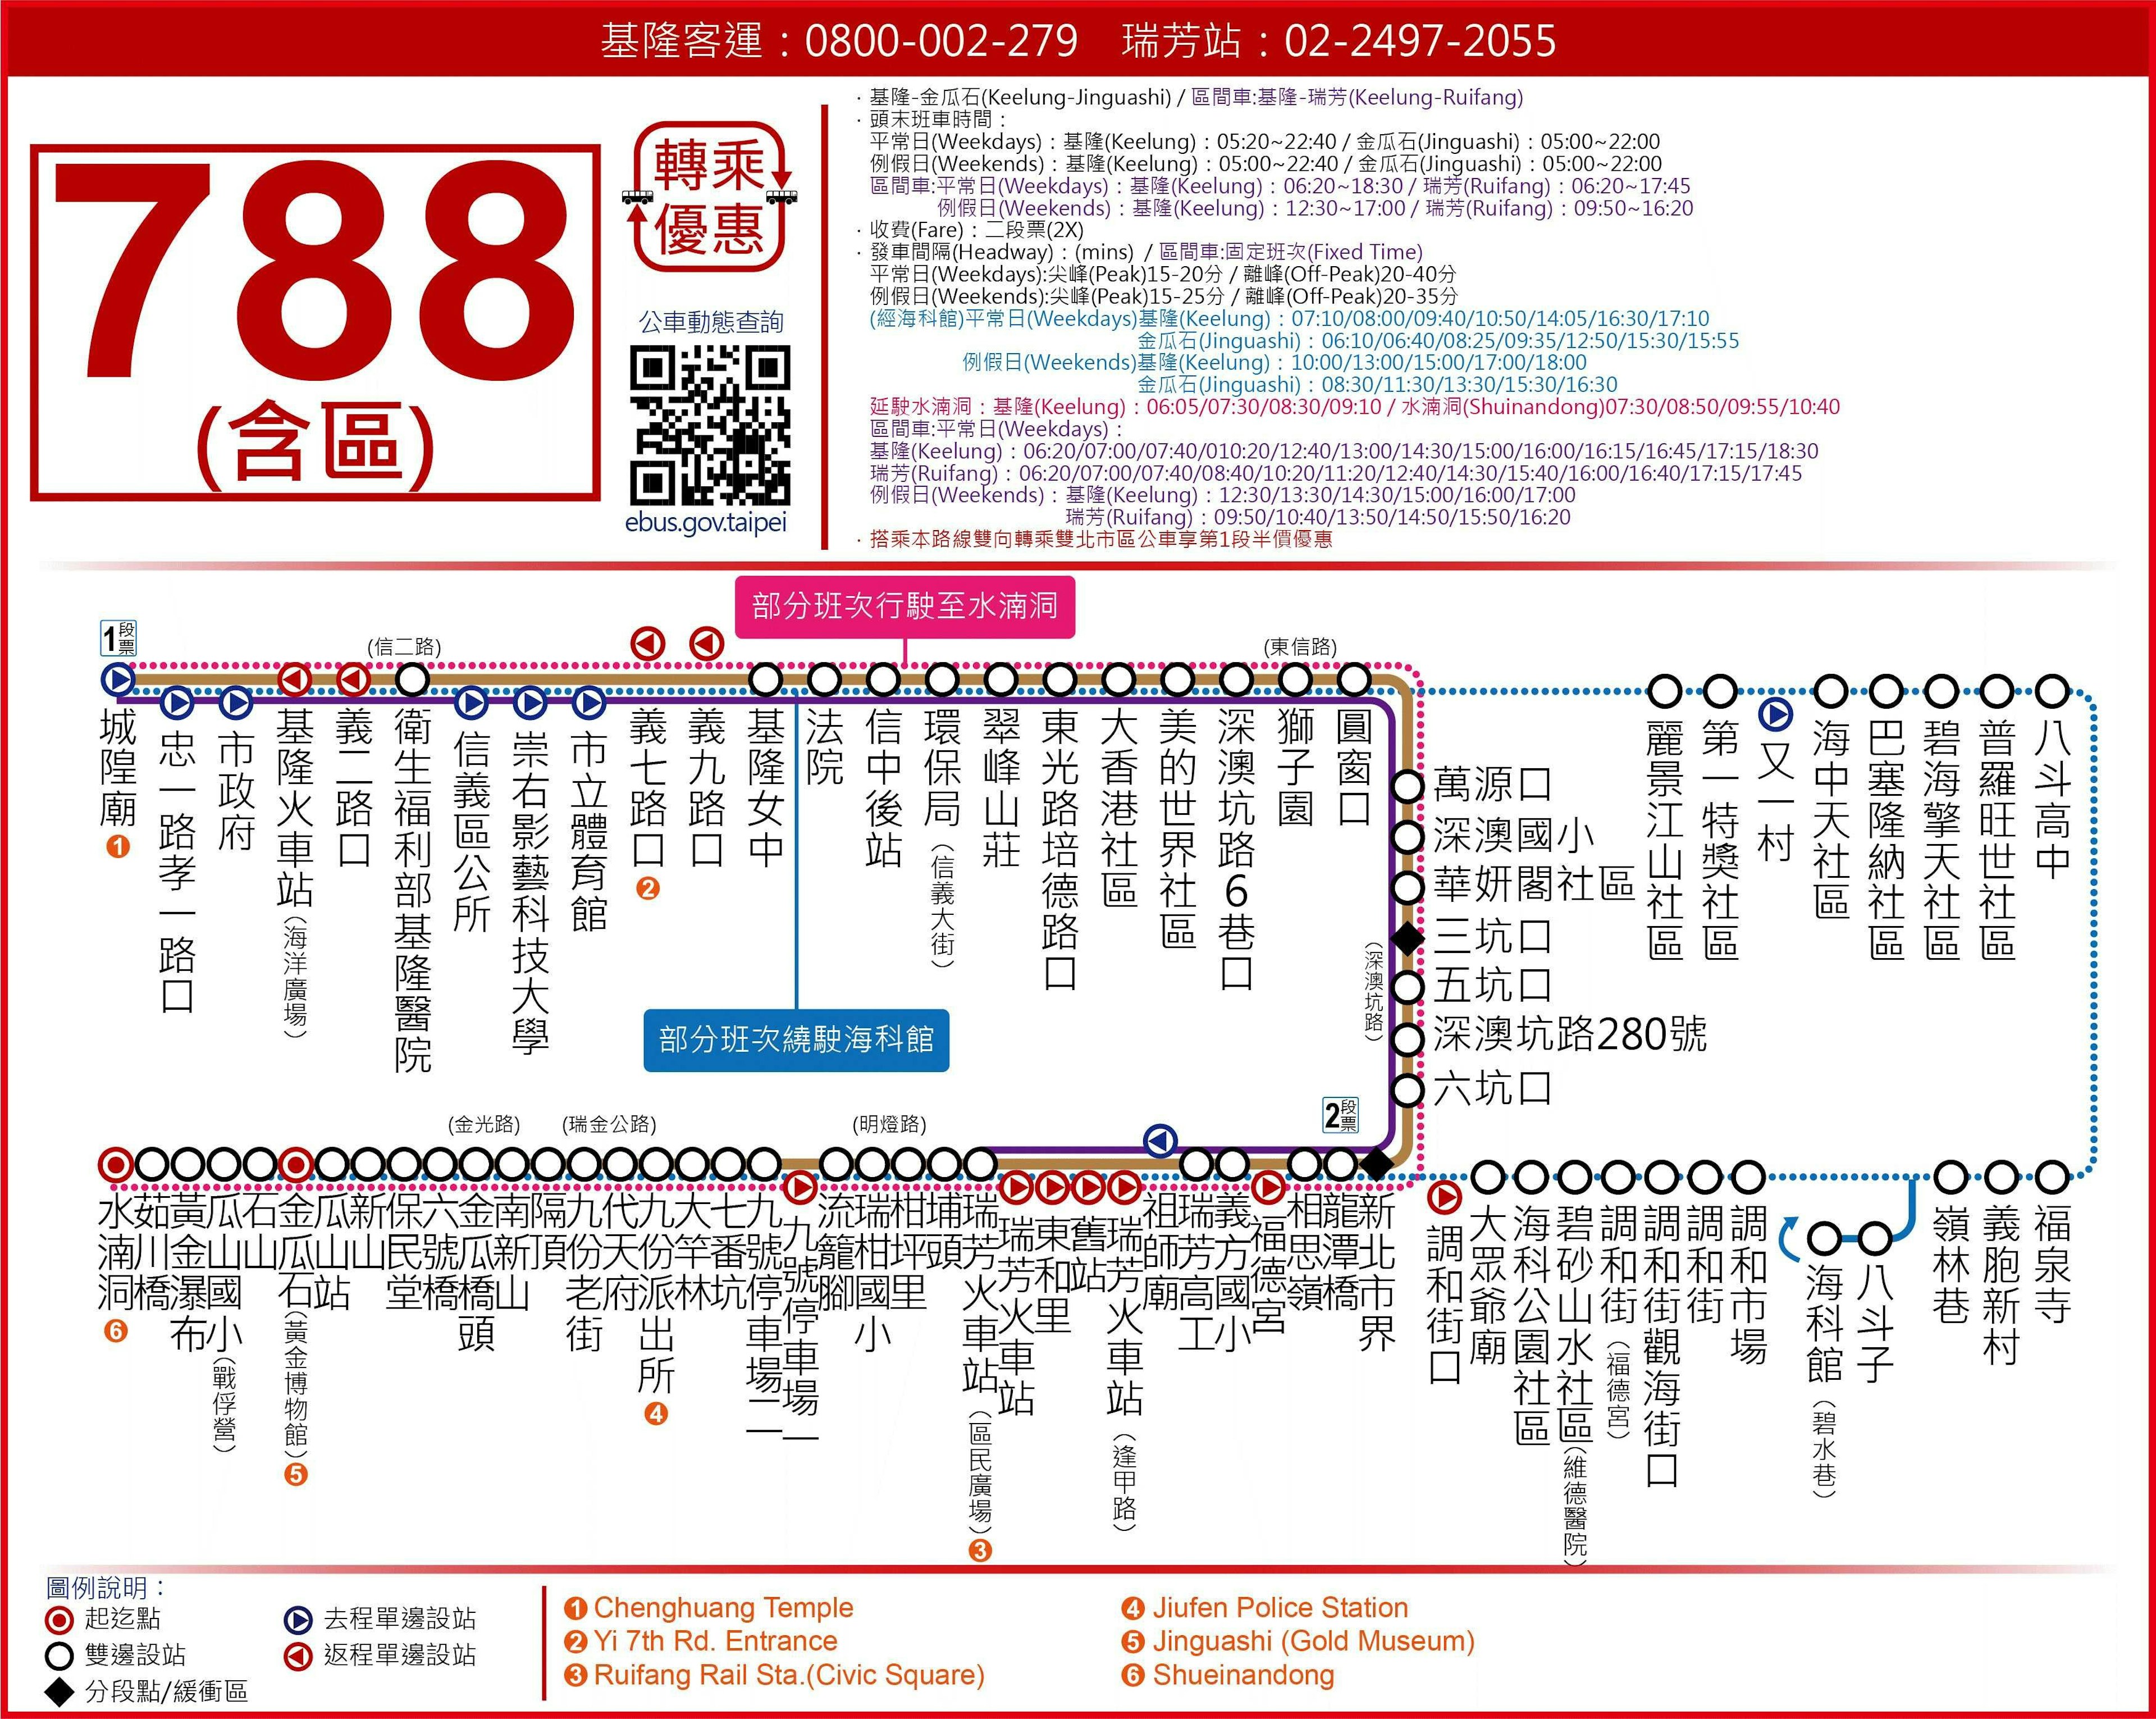 788 Marine Science MuseumRoute Map-新北市 Bus